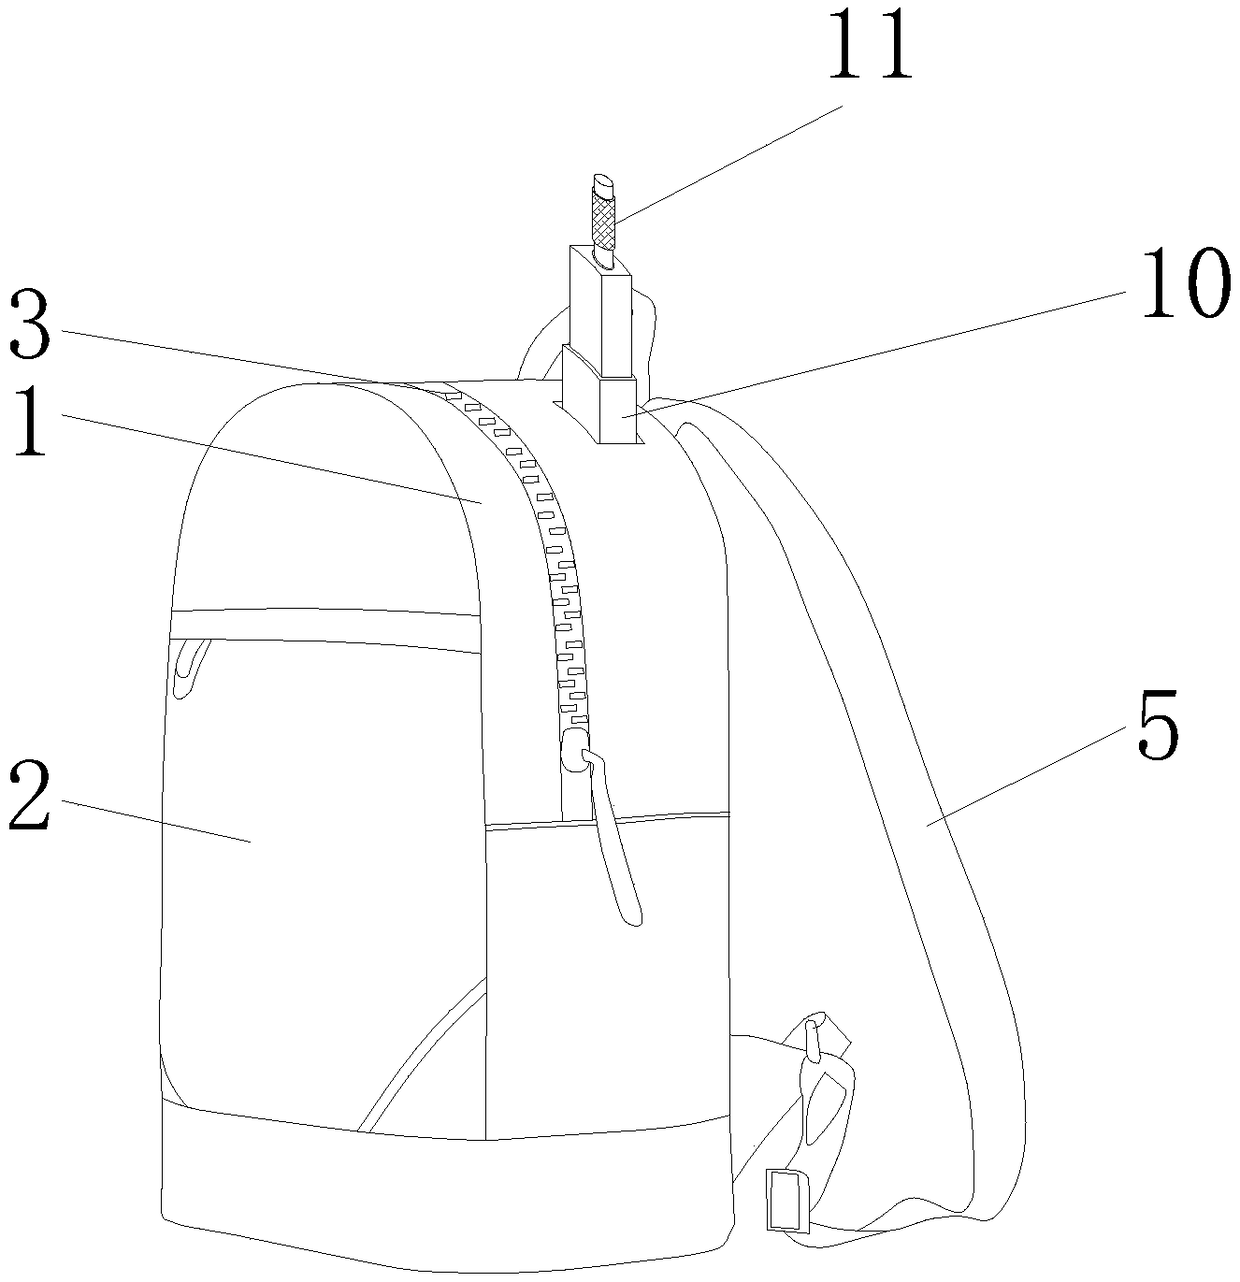 Backpack with waterproof structure